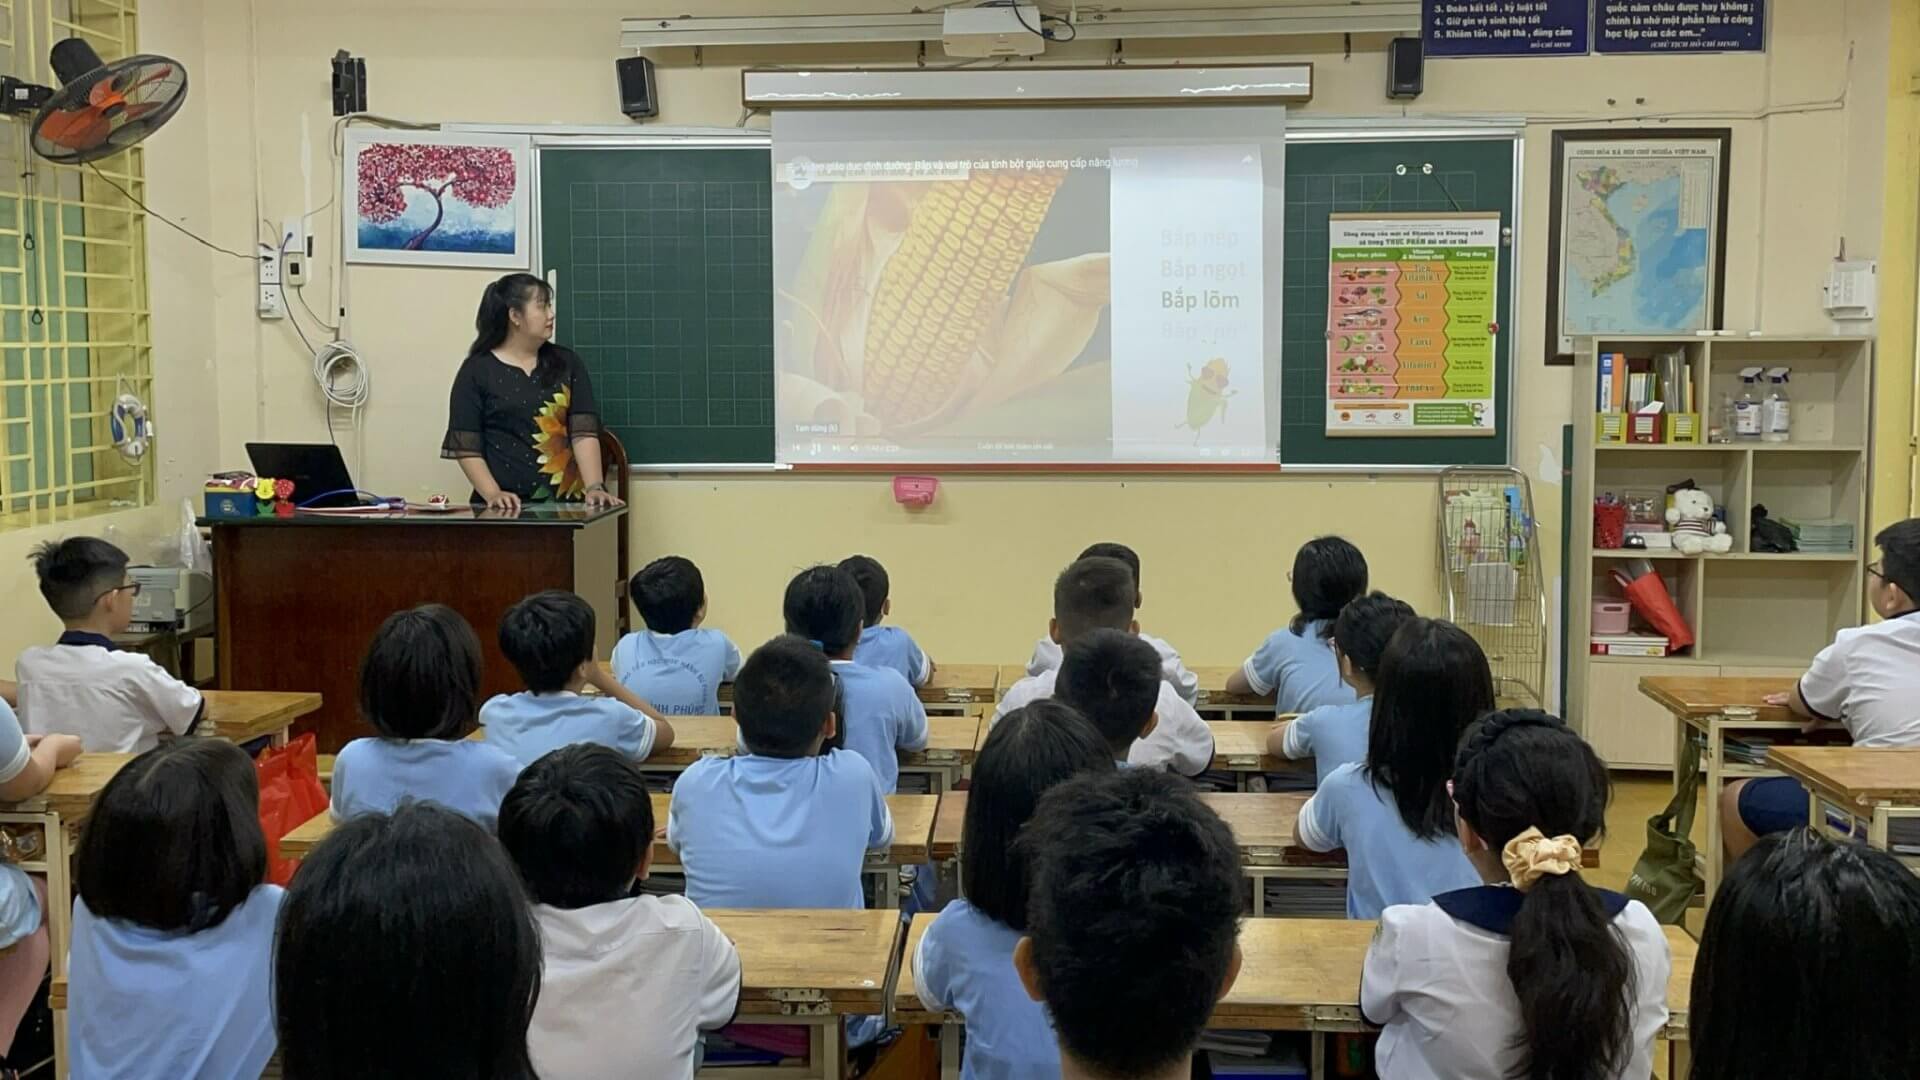 Food Nutrition Education “3 minutes to change awareness” program